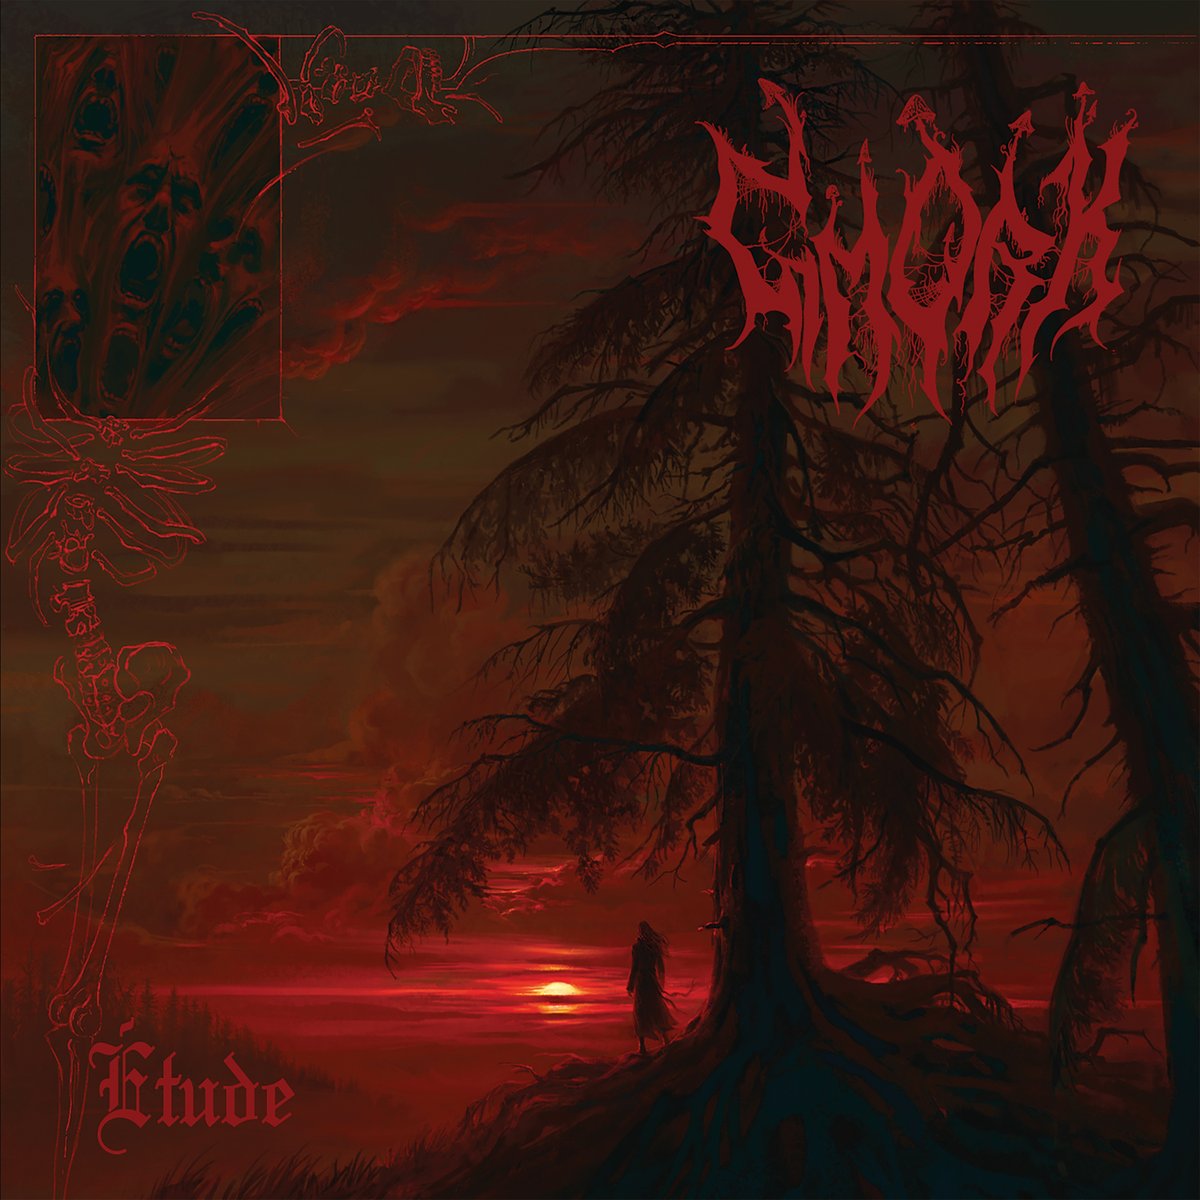 youtu.be/NymjcbayzZU
Gmork from Russia
Melodic Black Metal (2024)
Label DARK EAST Productions

#SymphonicBlackMetalPromotion #MelodicBlackMetal #BlackMetal